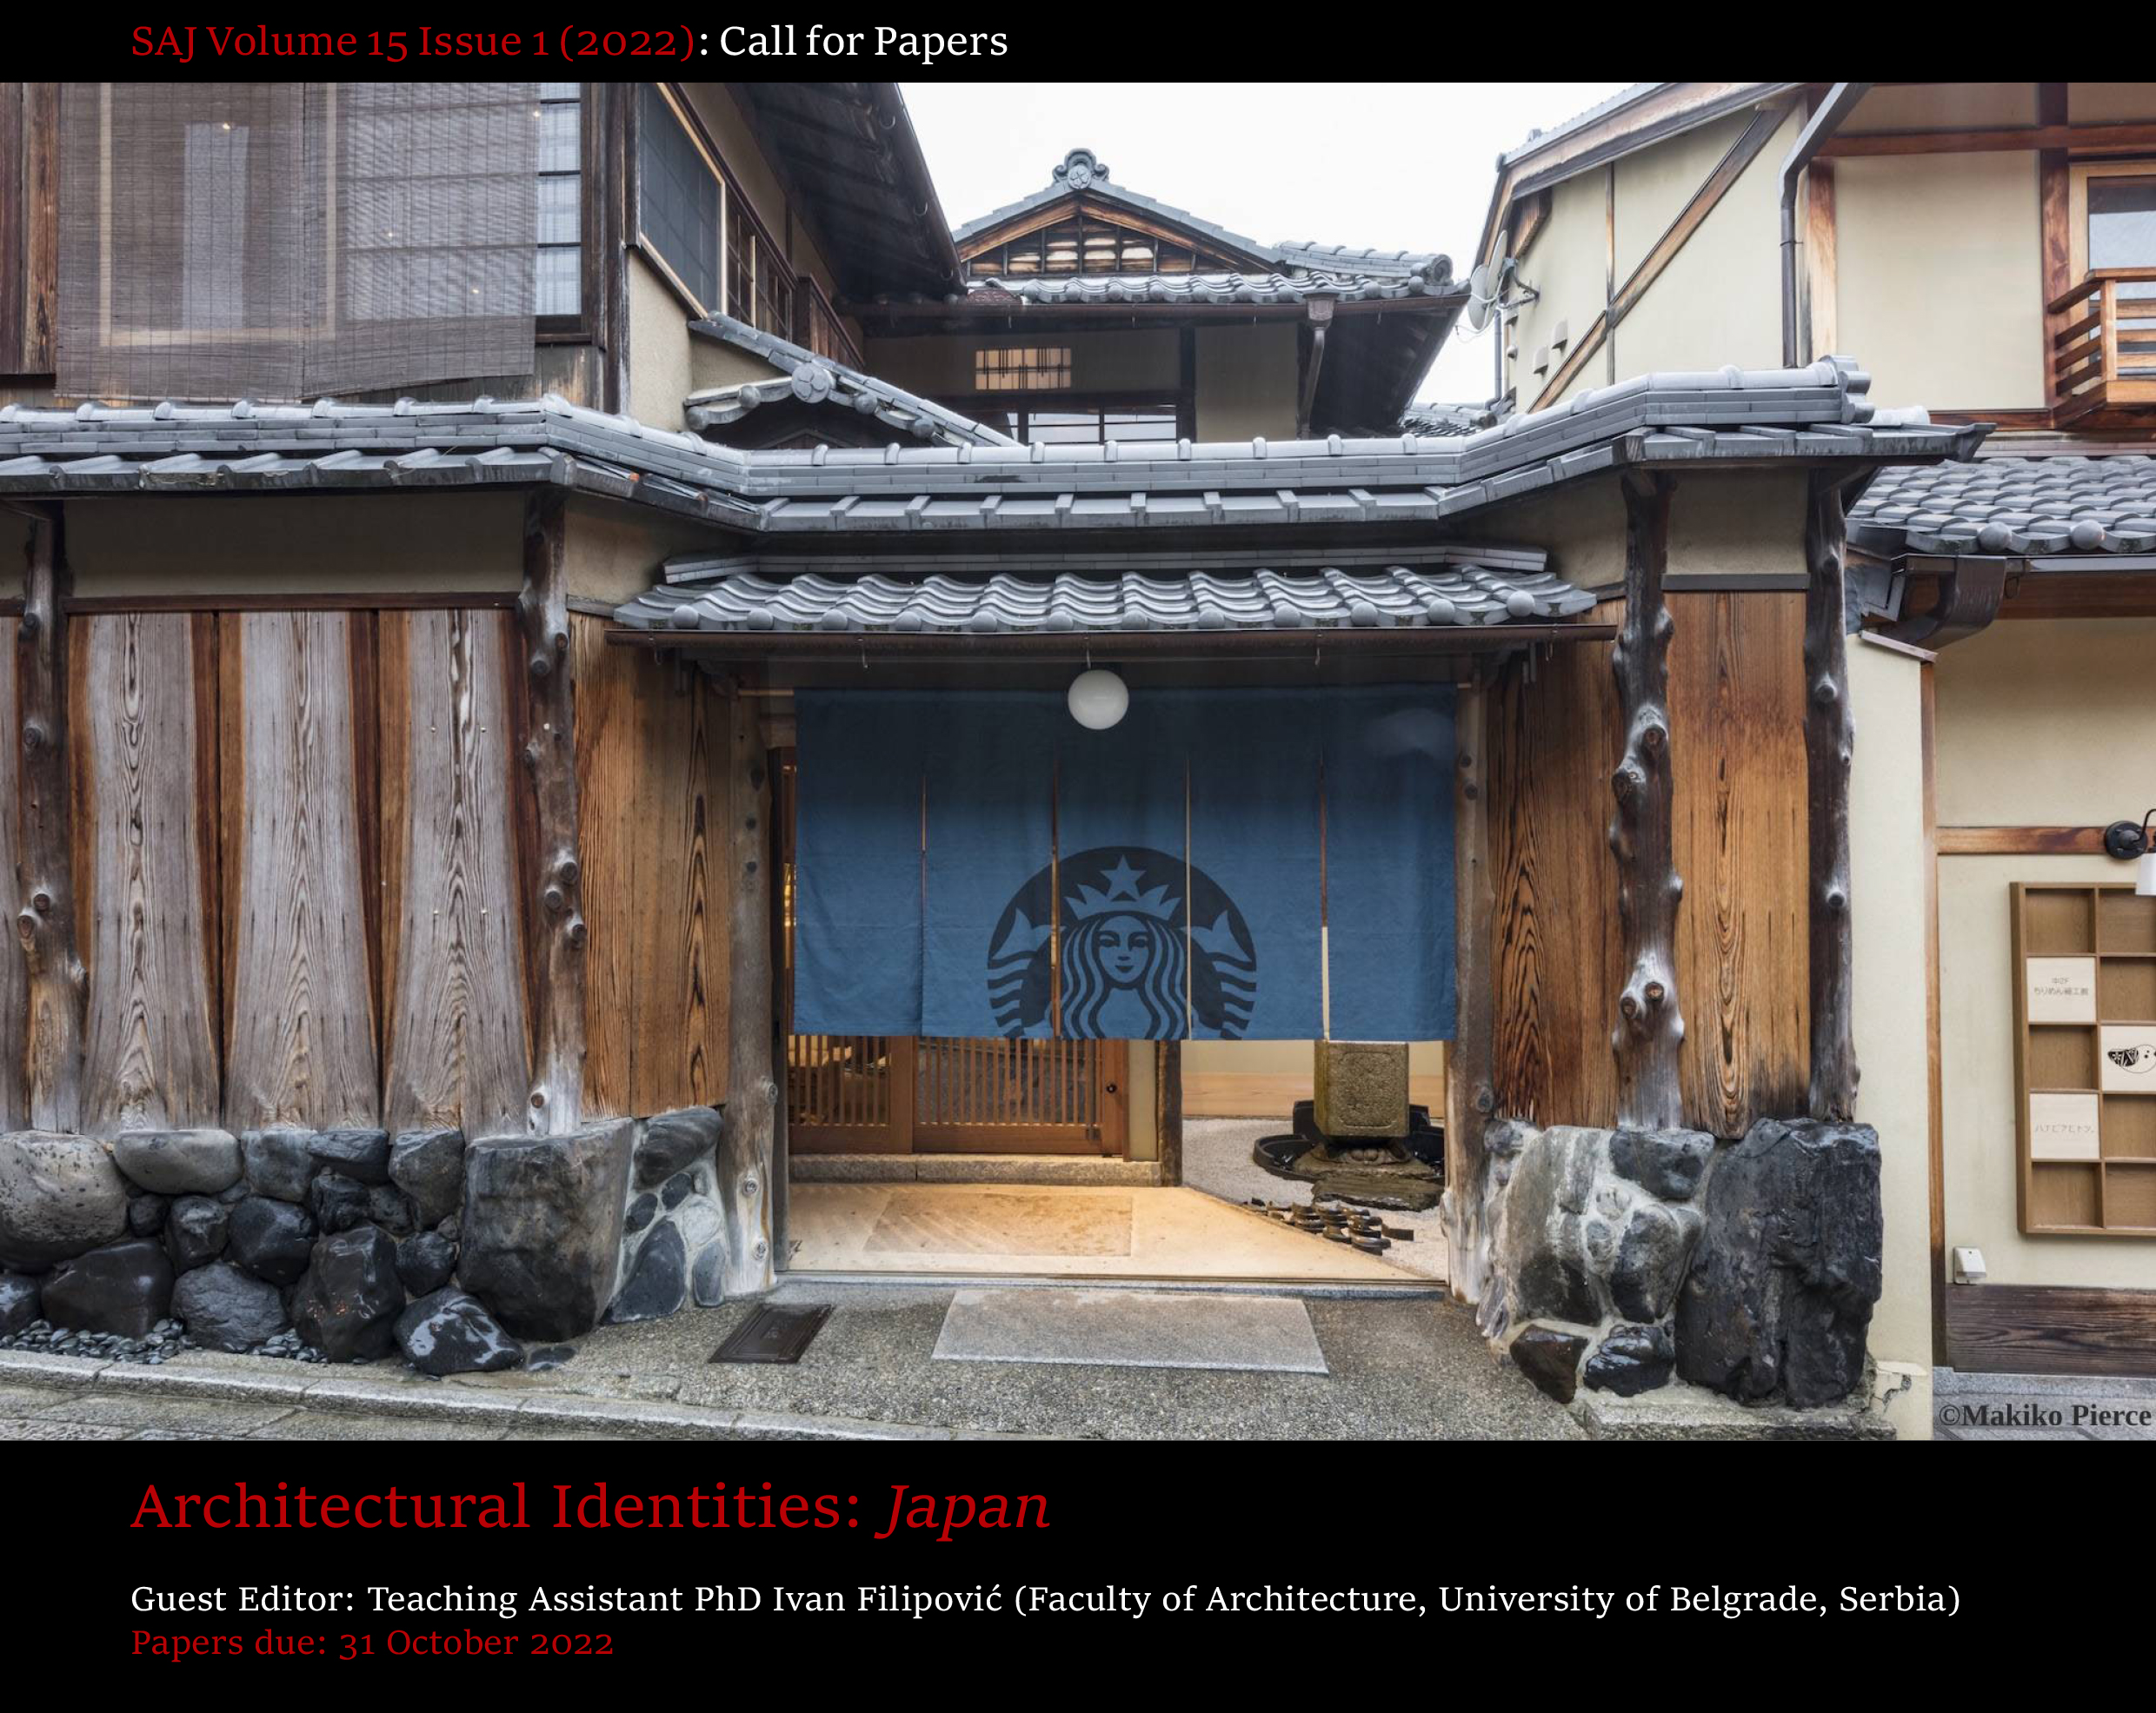 01.06.2022_Architectural Identities_Japan_Banner